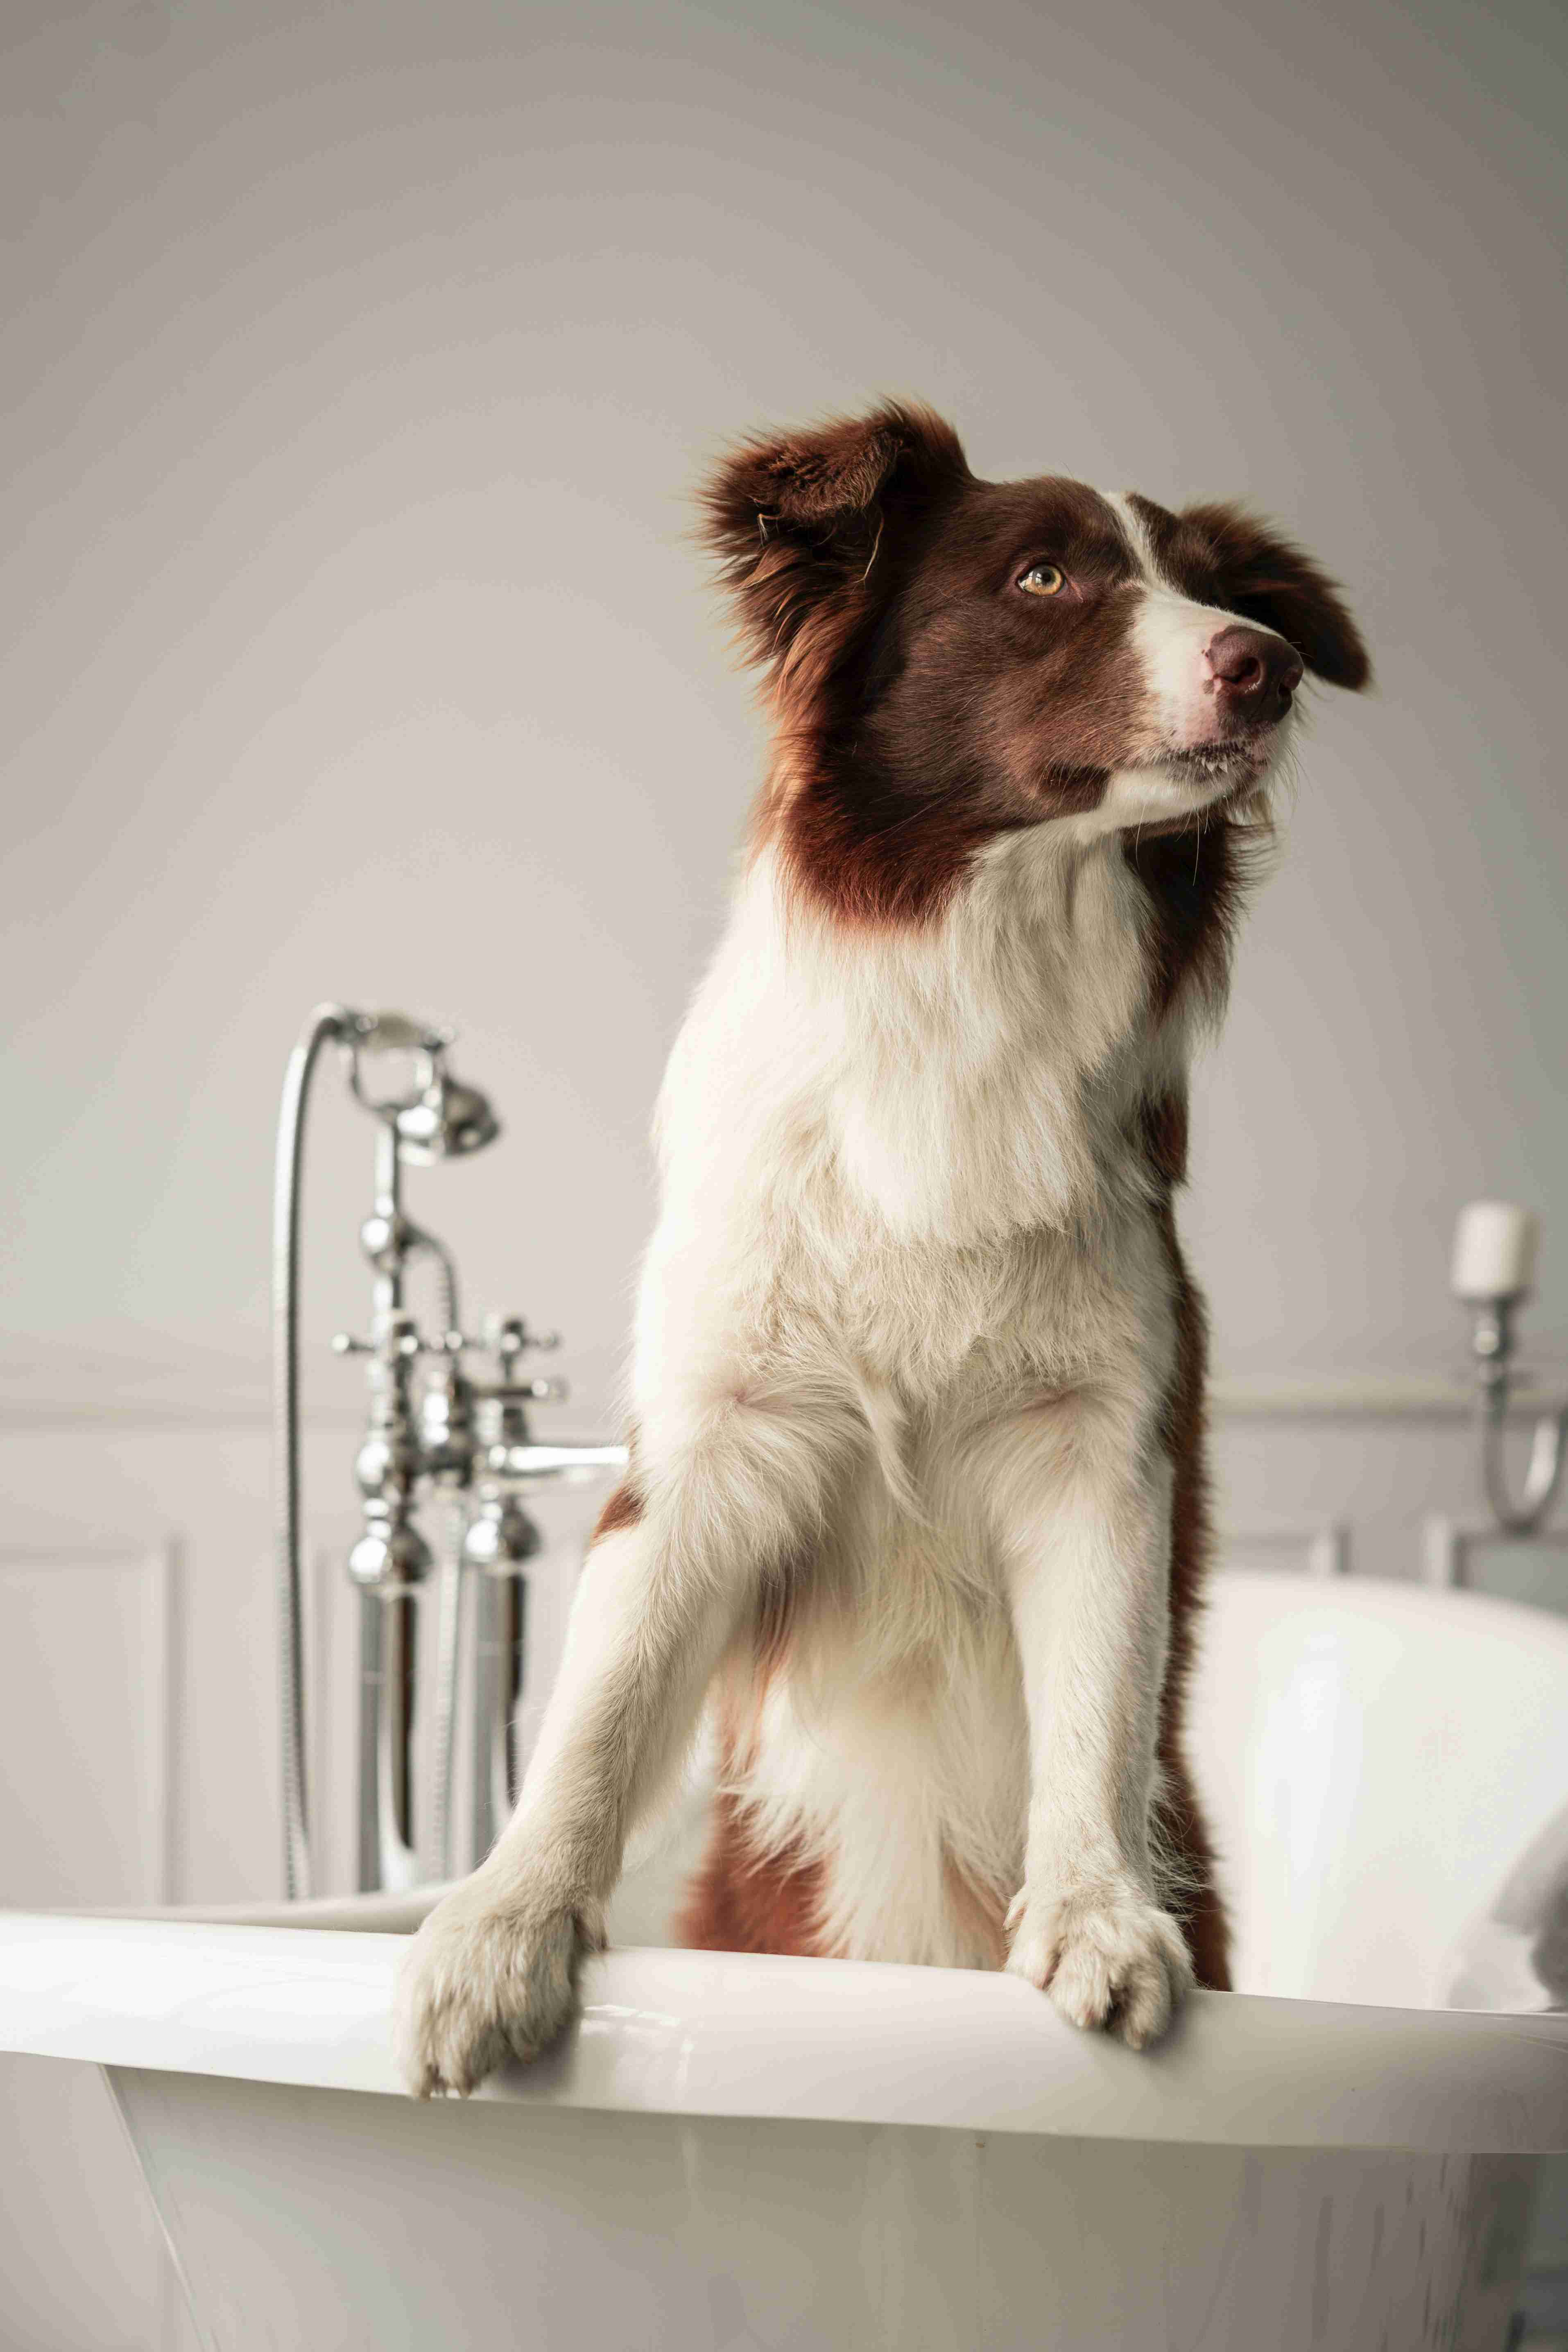 Is a Border Collie the Right Choice for First-Time Dog Owners: Pros and Cons